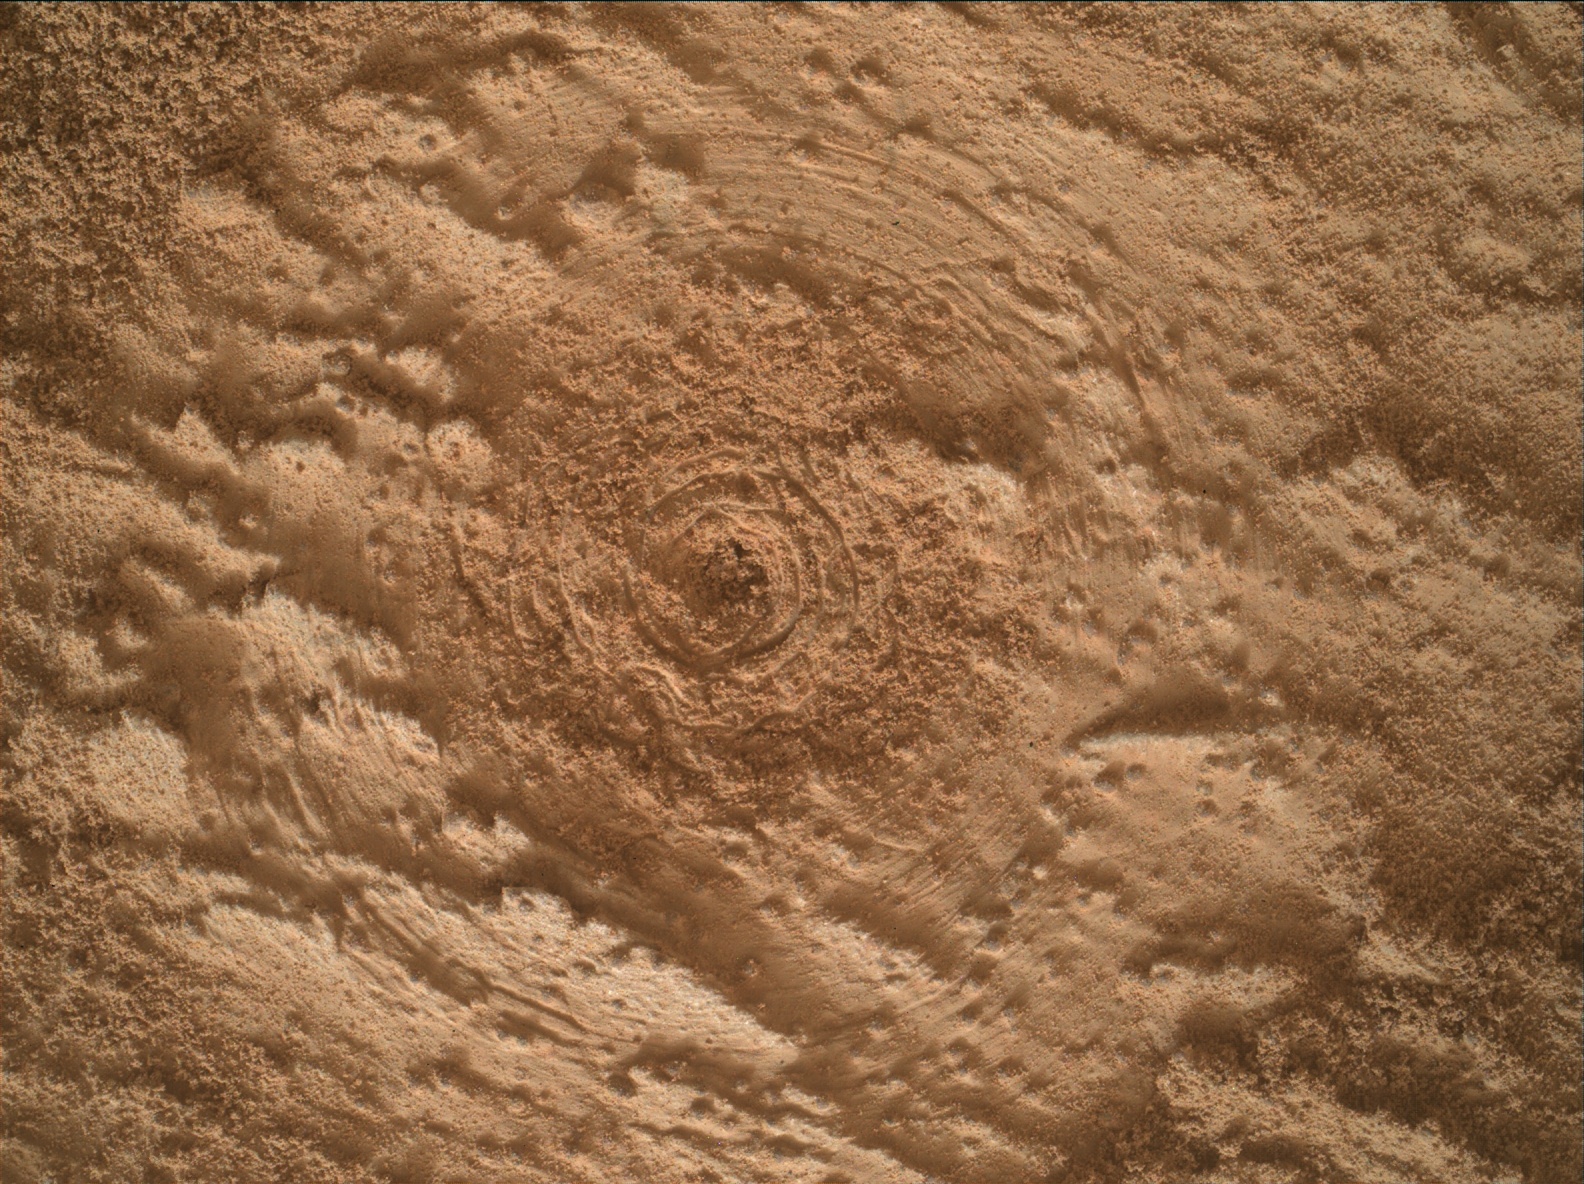 Nasa's Mars rover Curiosity acquired this image using its Mars Hand Lens Imager (MAHLI) on Sol 3481